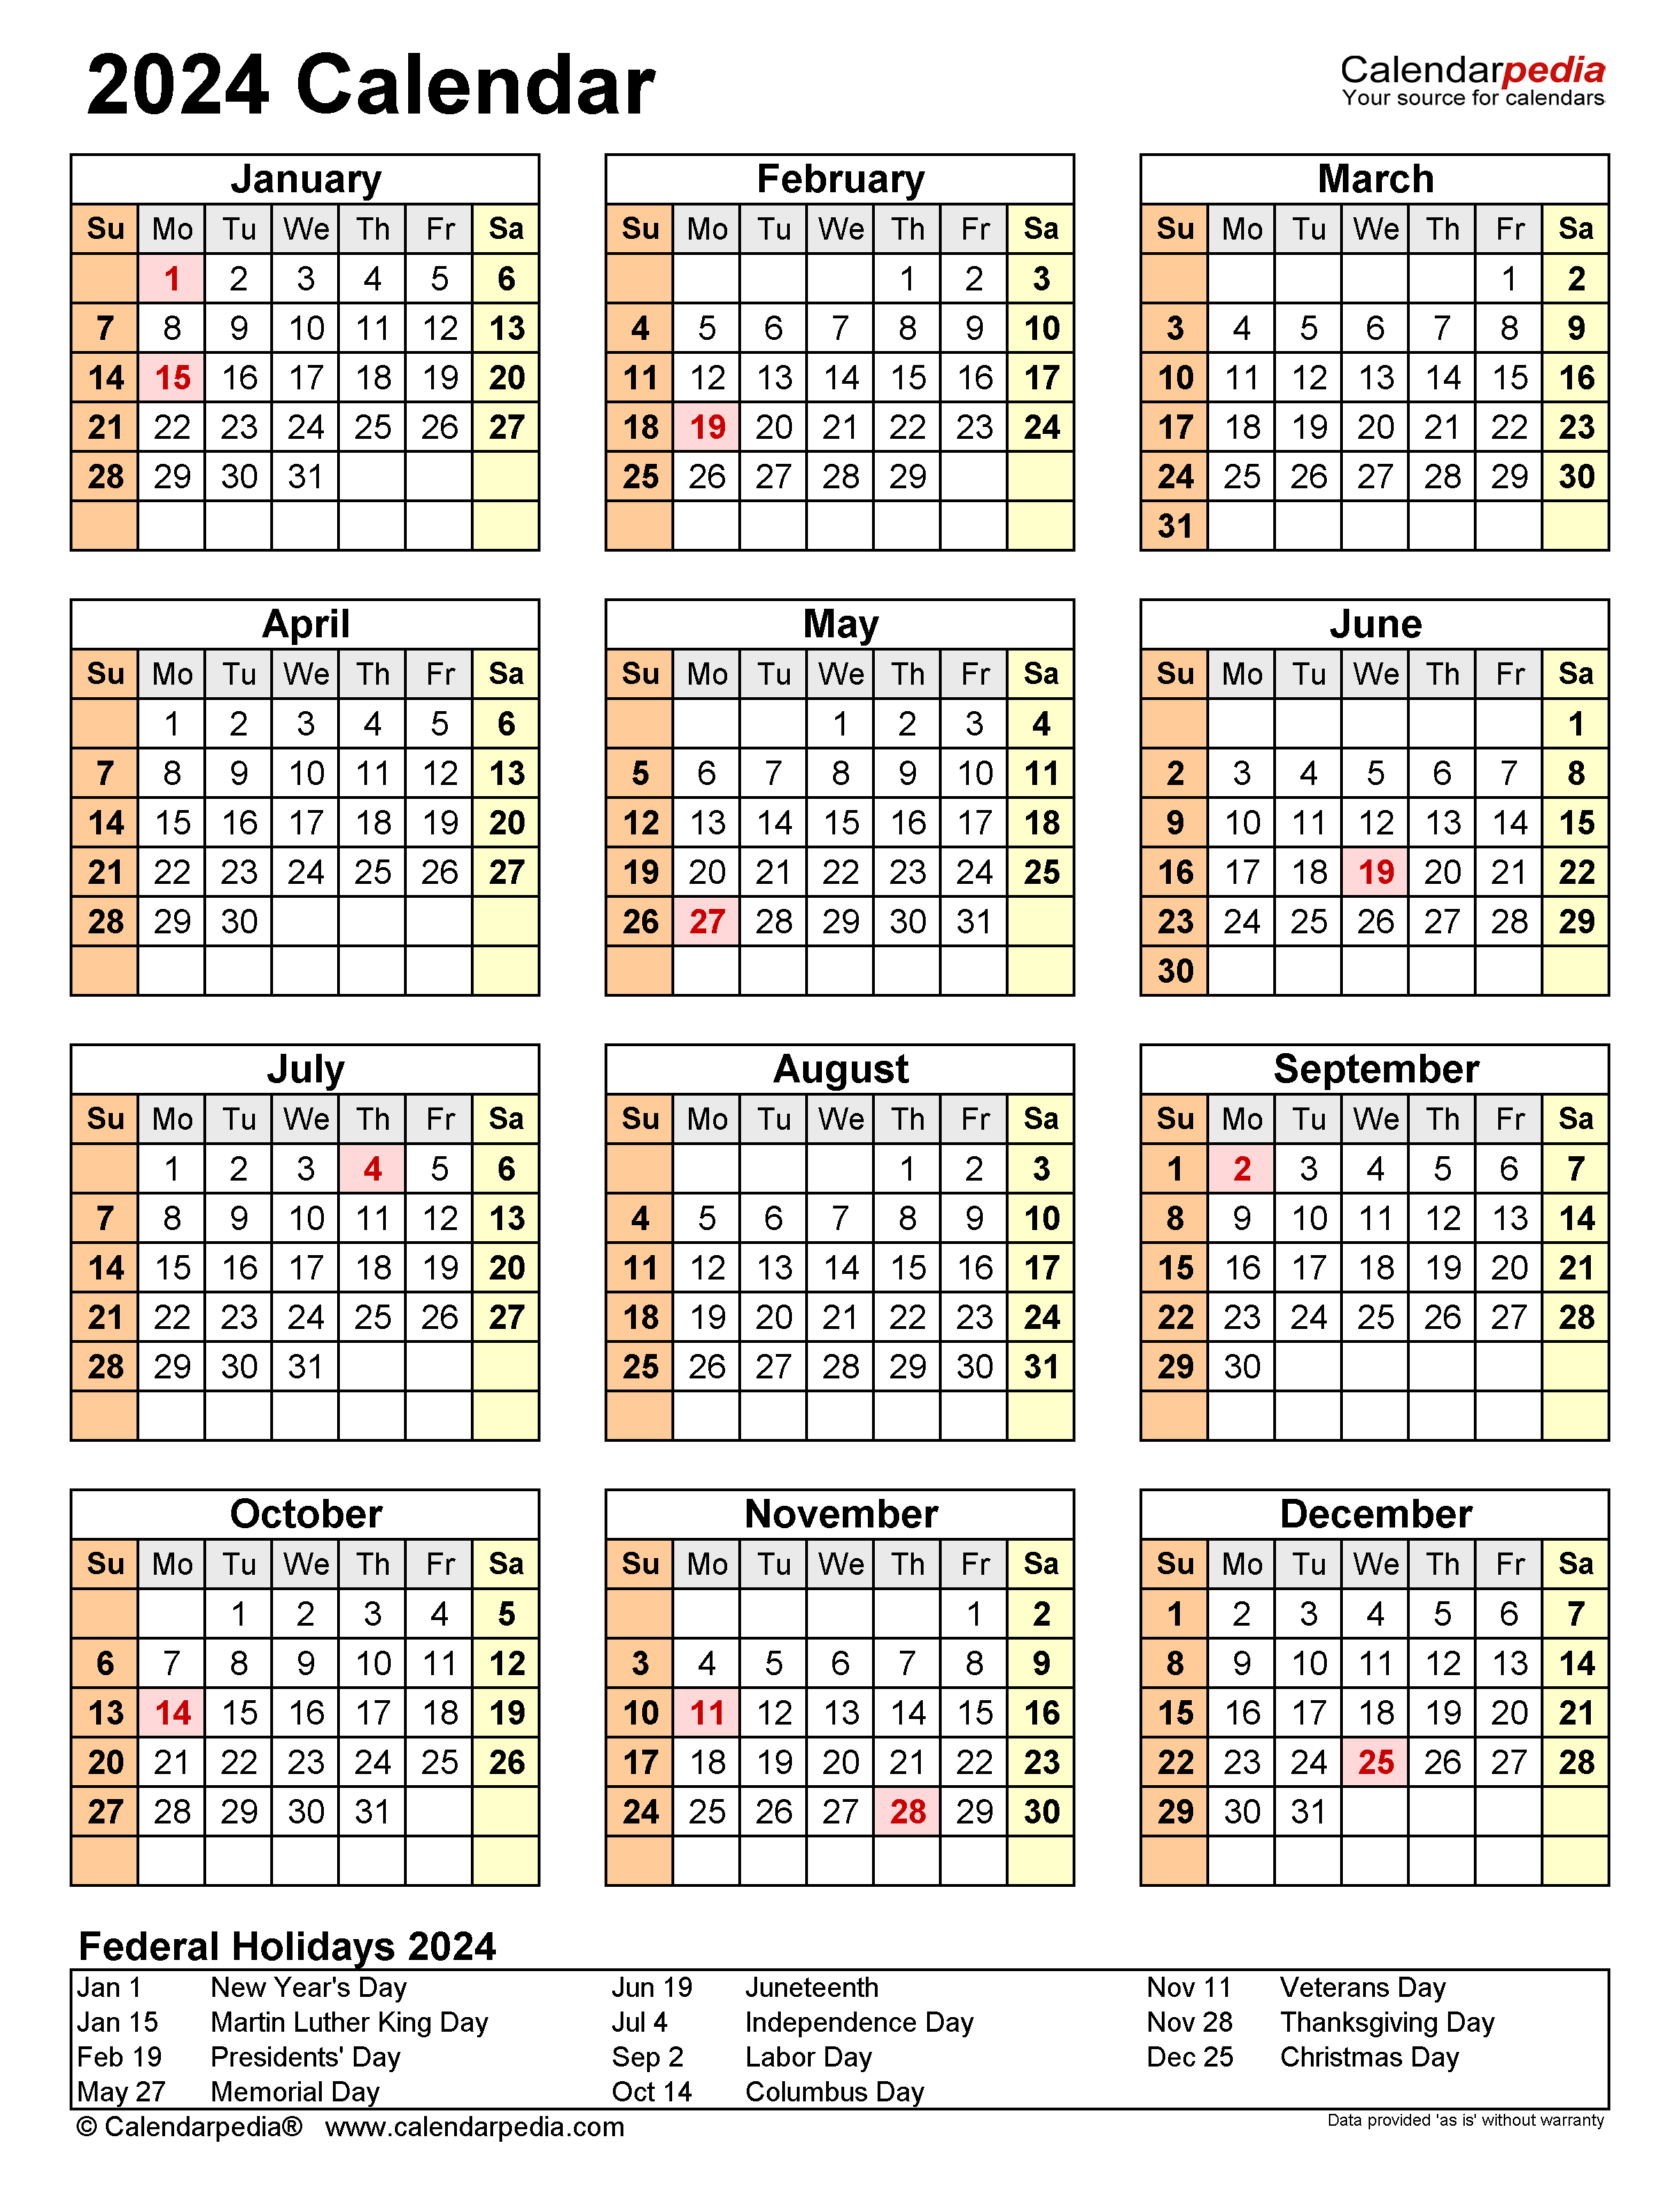 Free Printable 2024 Calendar With Holidays Crownflourmills | Free Printable 2024 Calendar With Holidays And Fun Facts